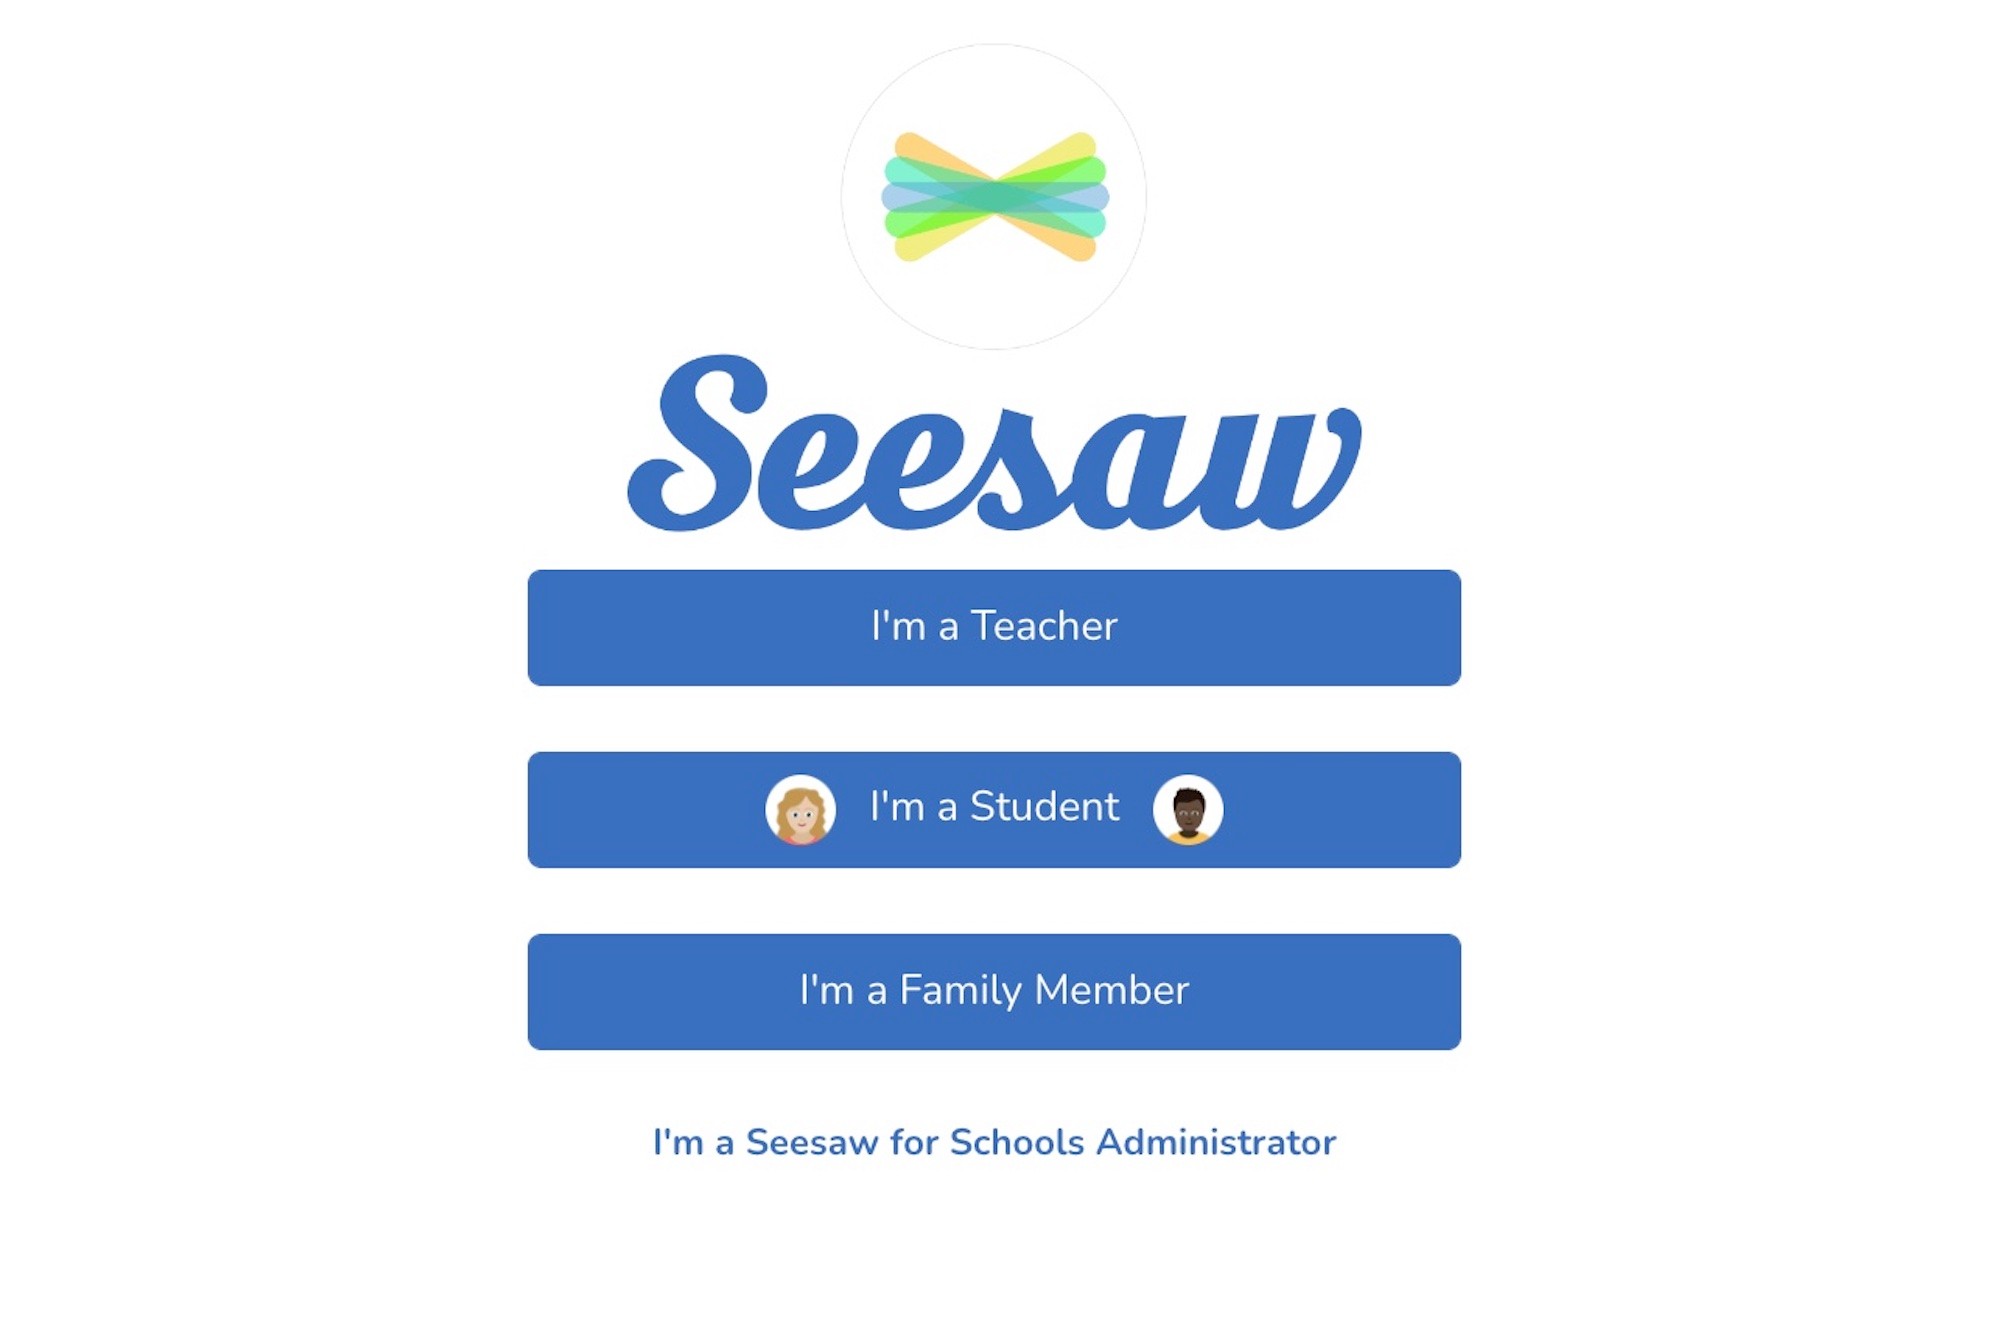 Teacher Student Xx Video - Here's the Goatse Image Hackers Sent on the Seesaw Parent-Teacher Messaging  App at Schools Around the Country